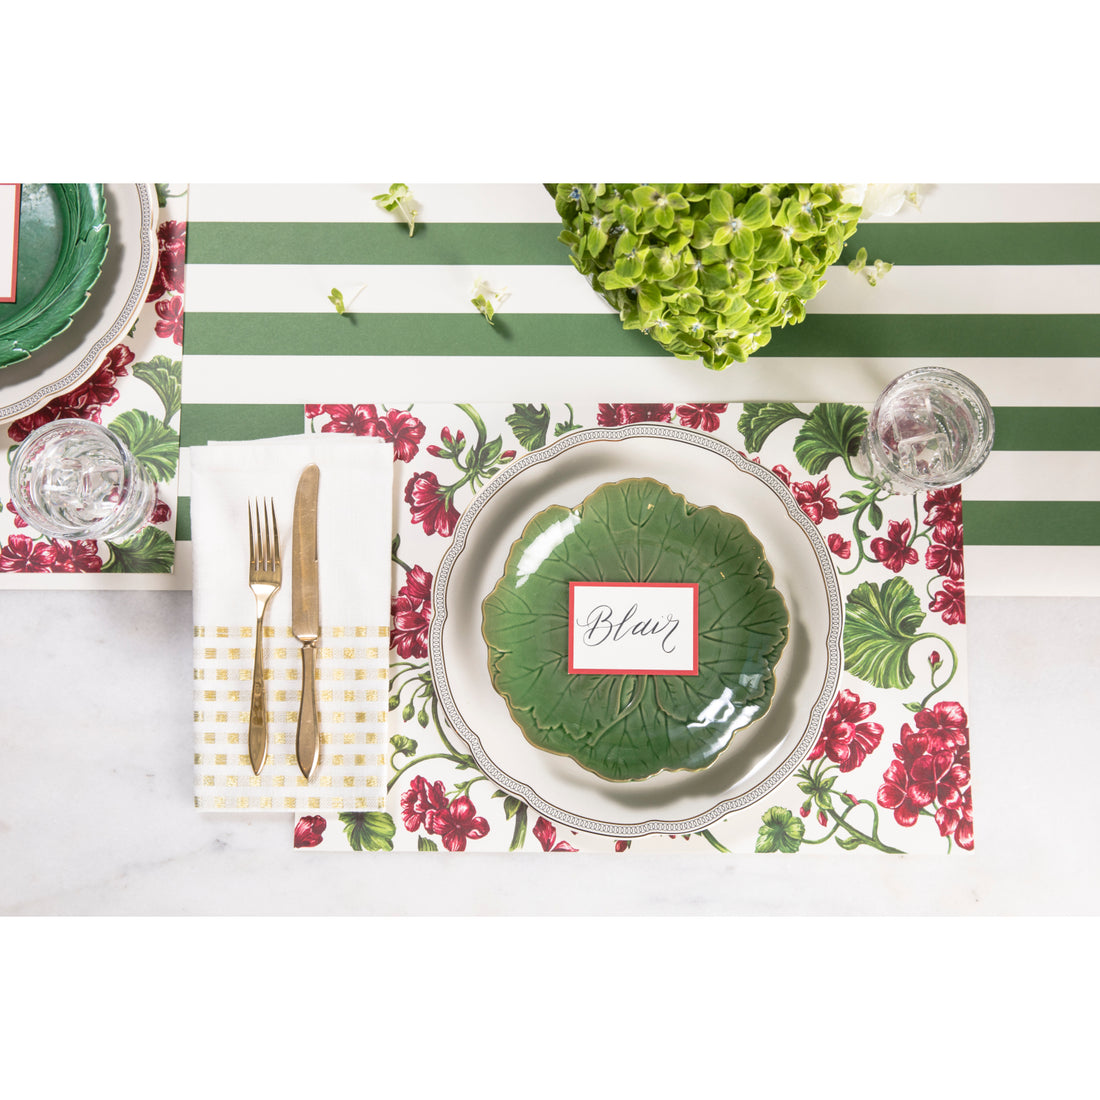 The Geranium Garden Placemat under an elegant table setting, from above.